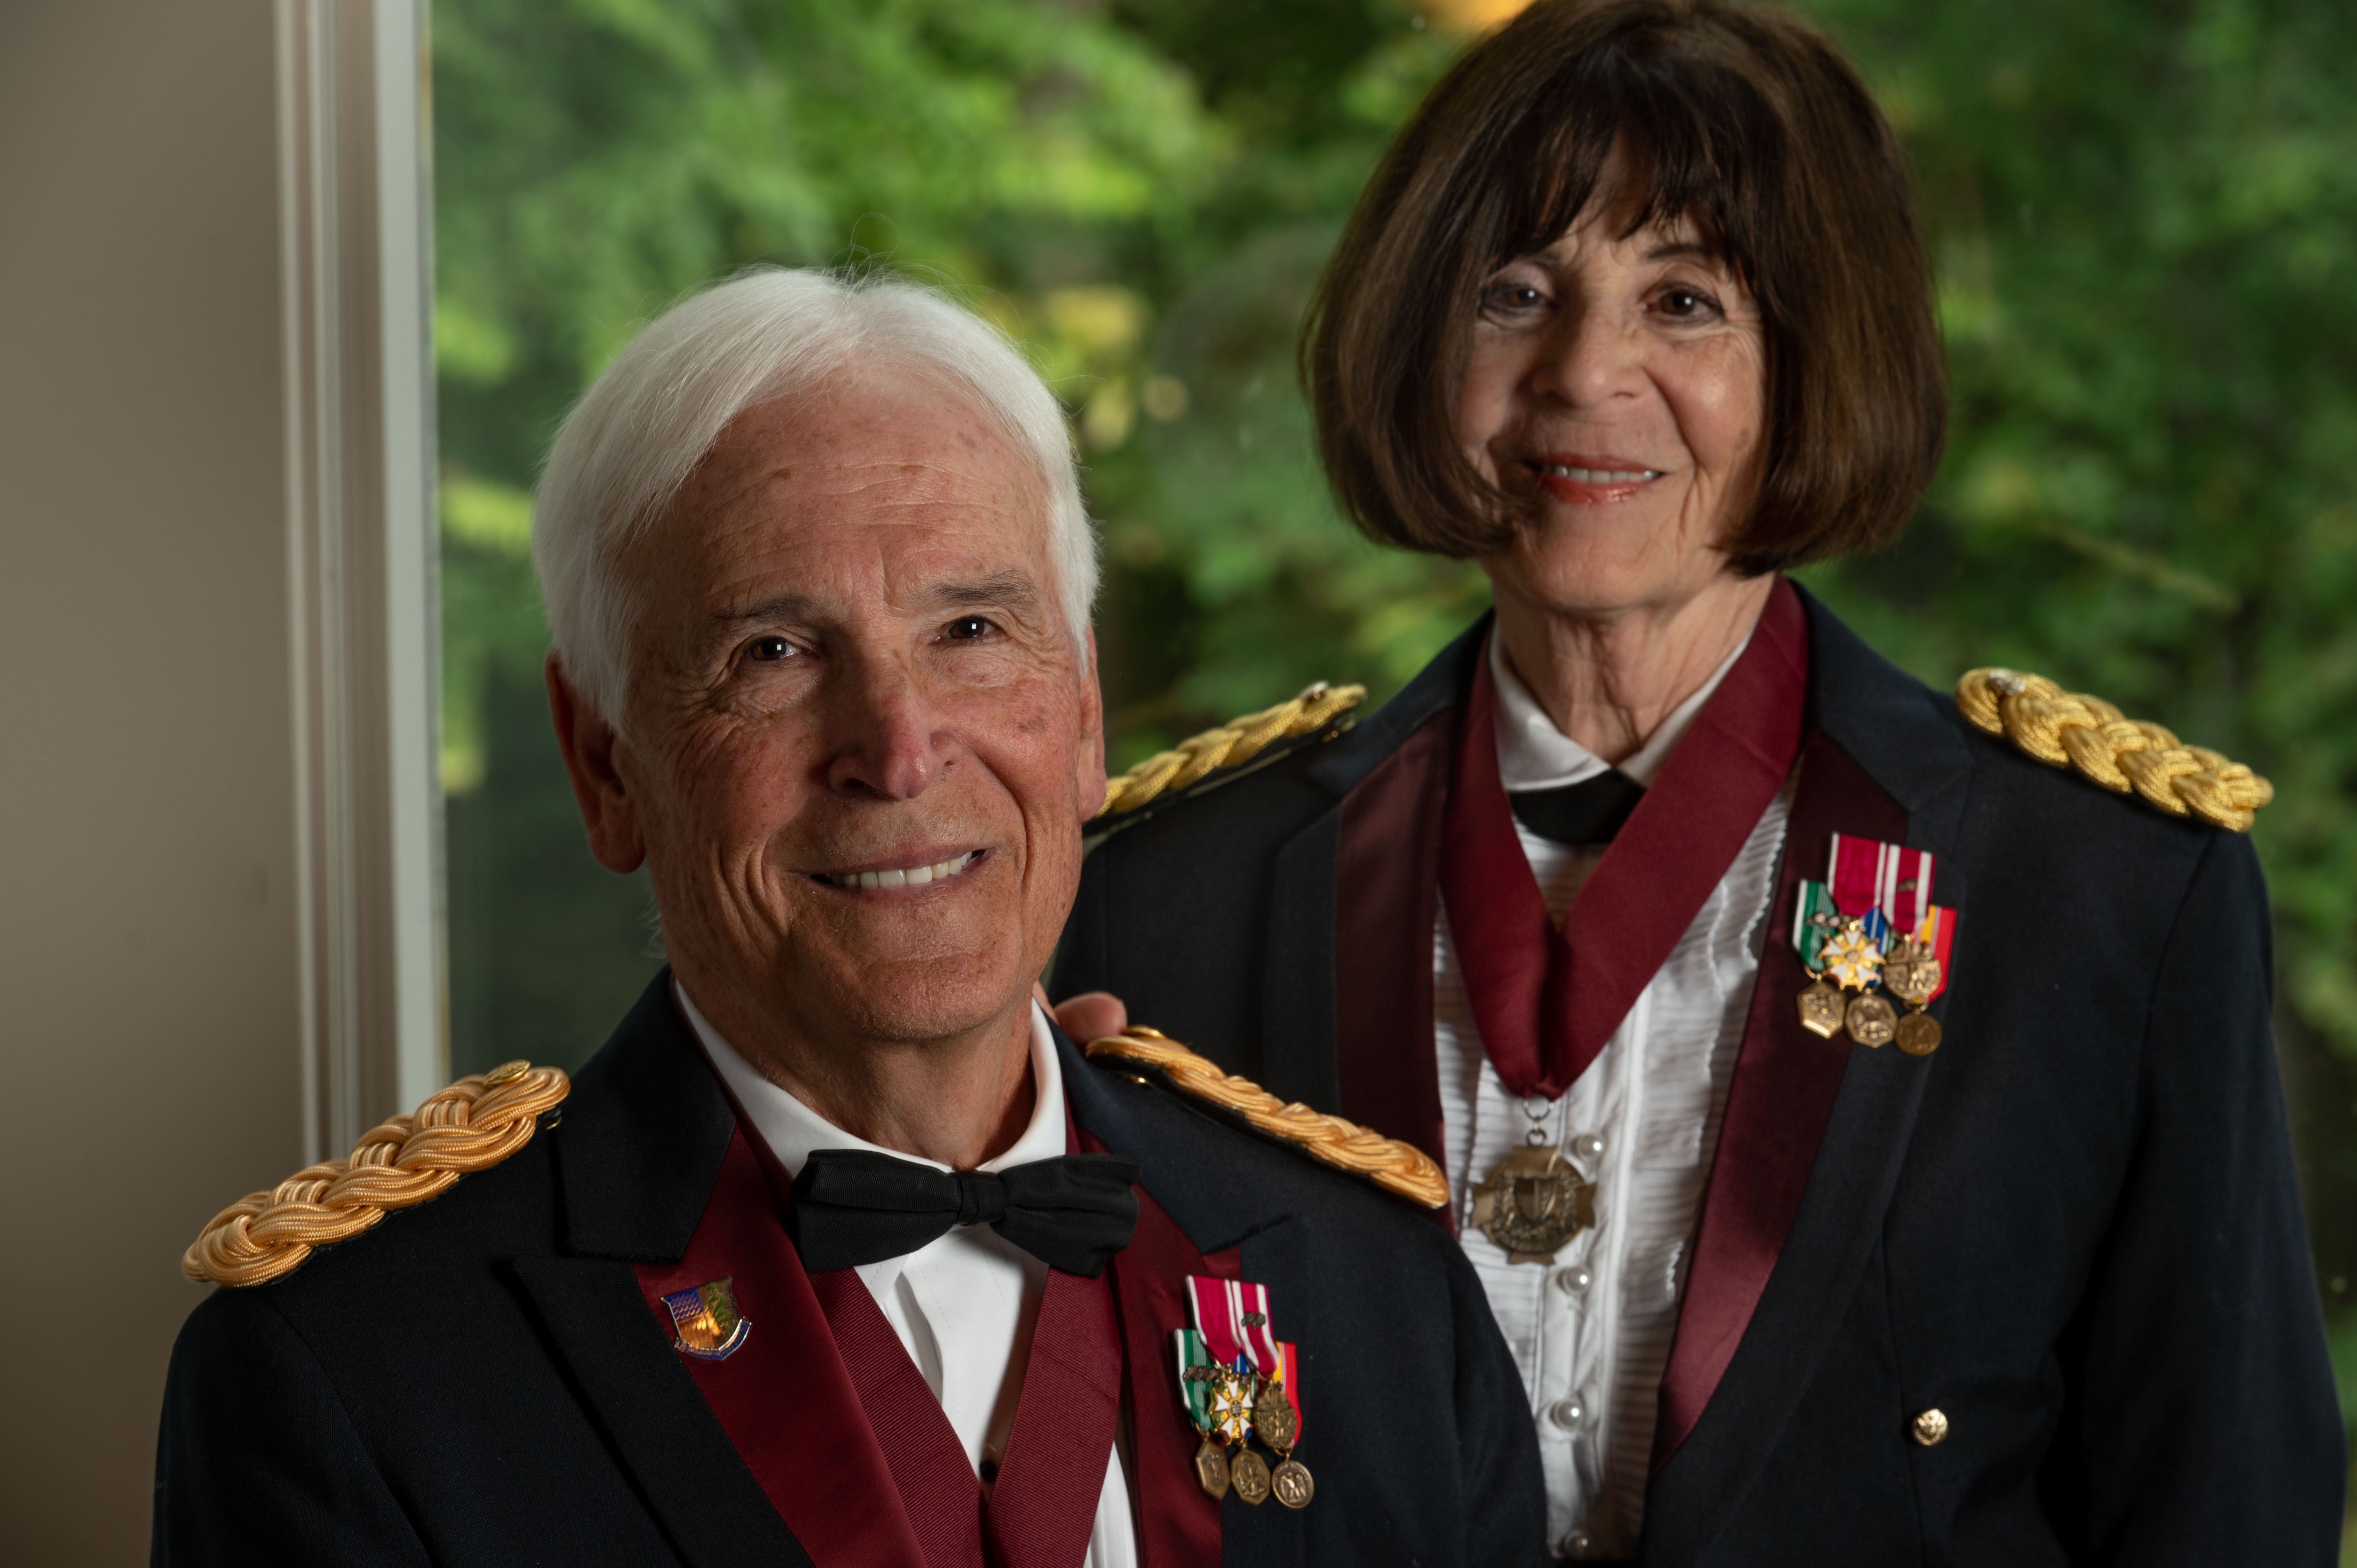 Dr. Jerry Jaax and Dr. Nancy Dunn Jaax